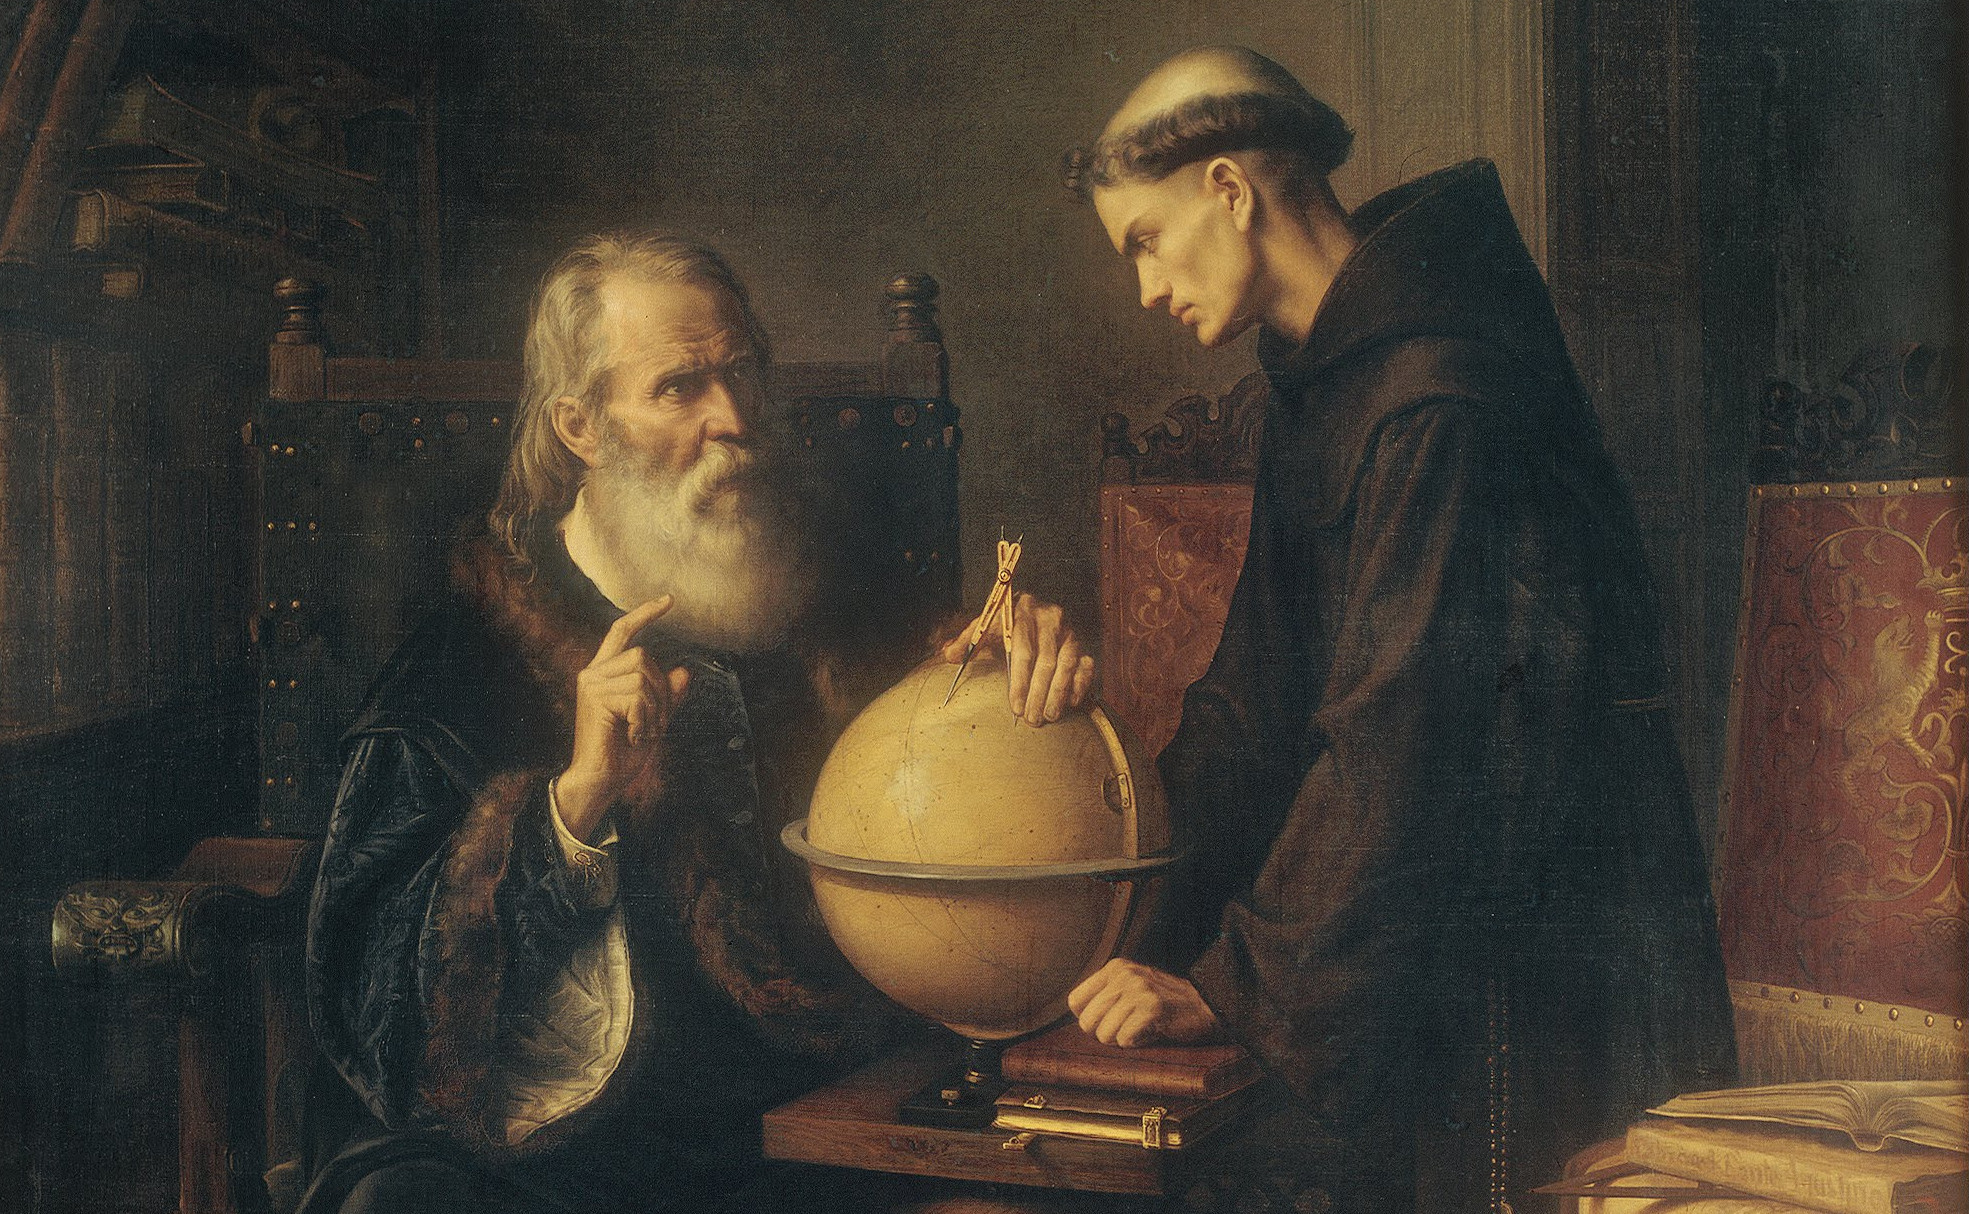 Félix_Parra_-_Galileo_Demonstrating_the_New_Astronomical_Theories_at_the_University_of_Padua_-_Google_Art_Project